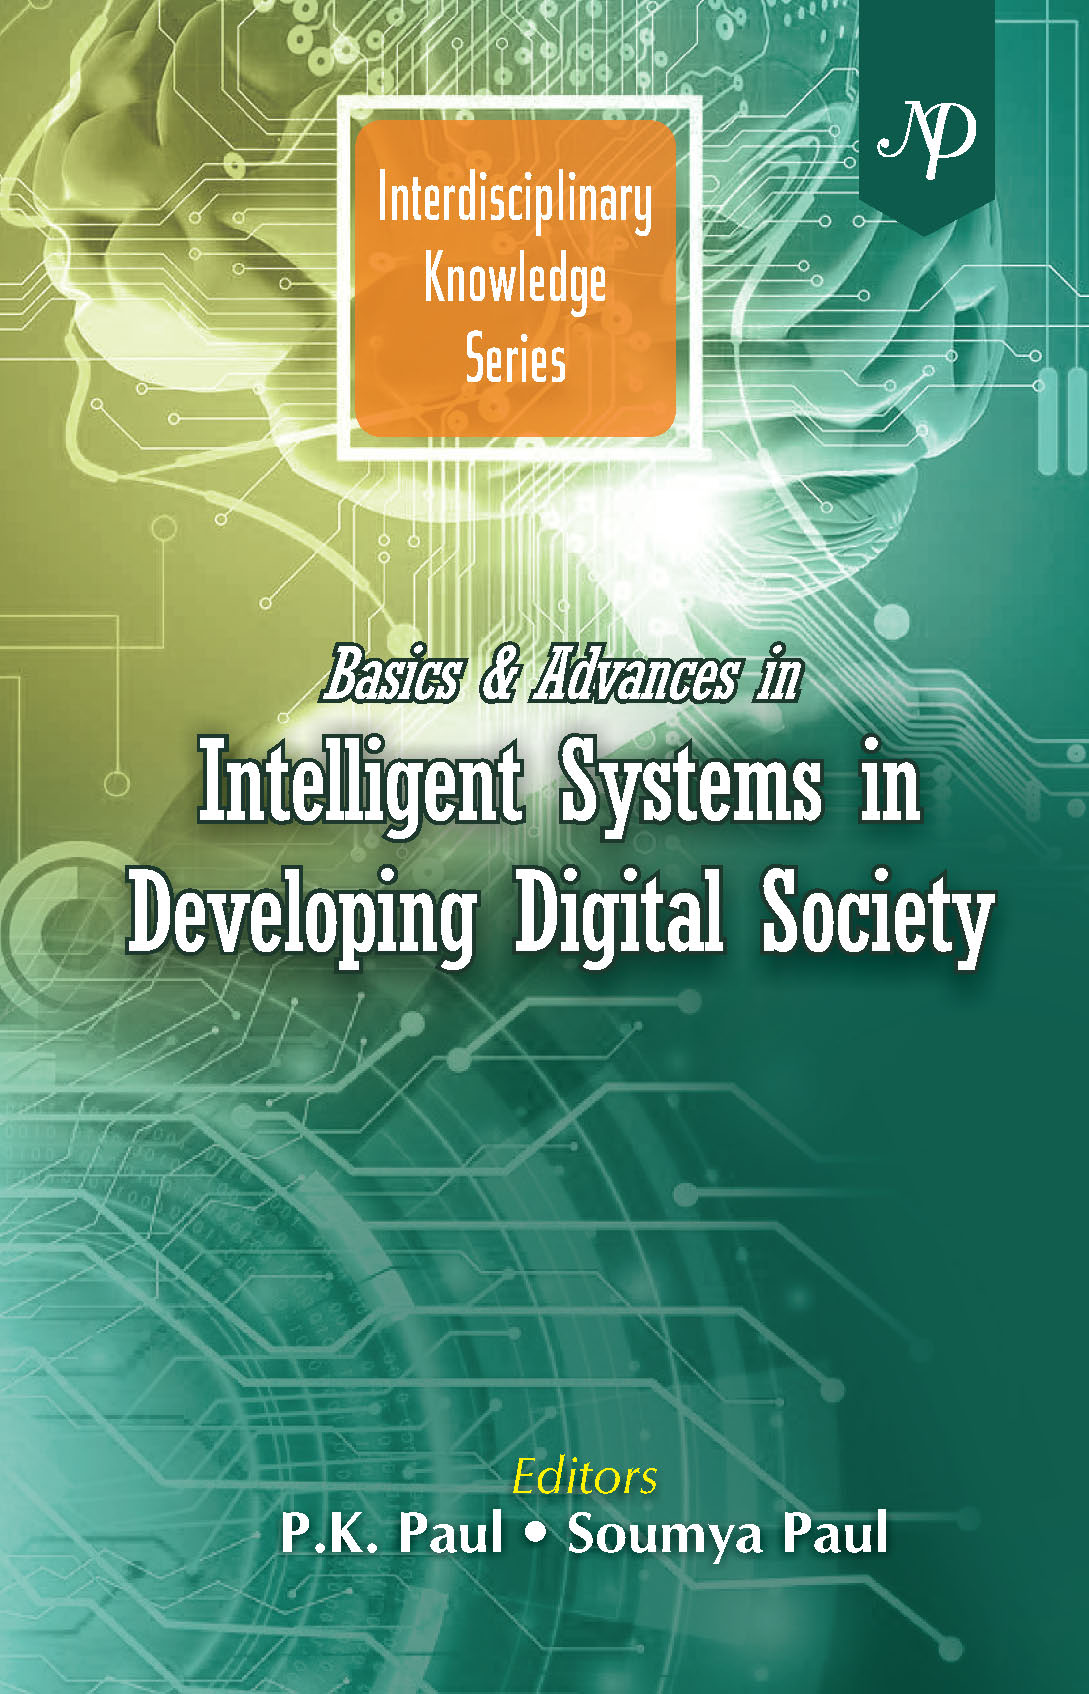 Basic and Advances in Intelligent systems Cover.jpg